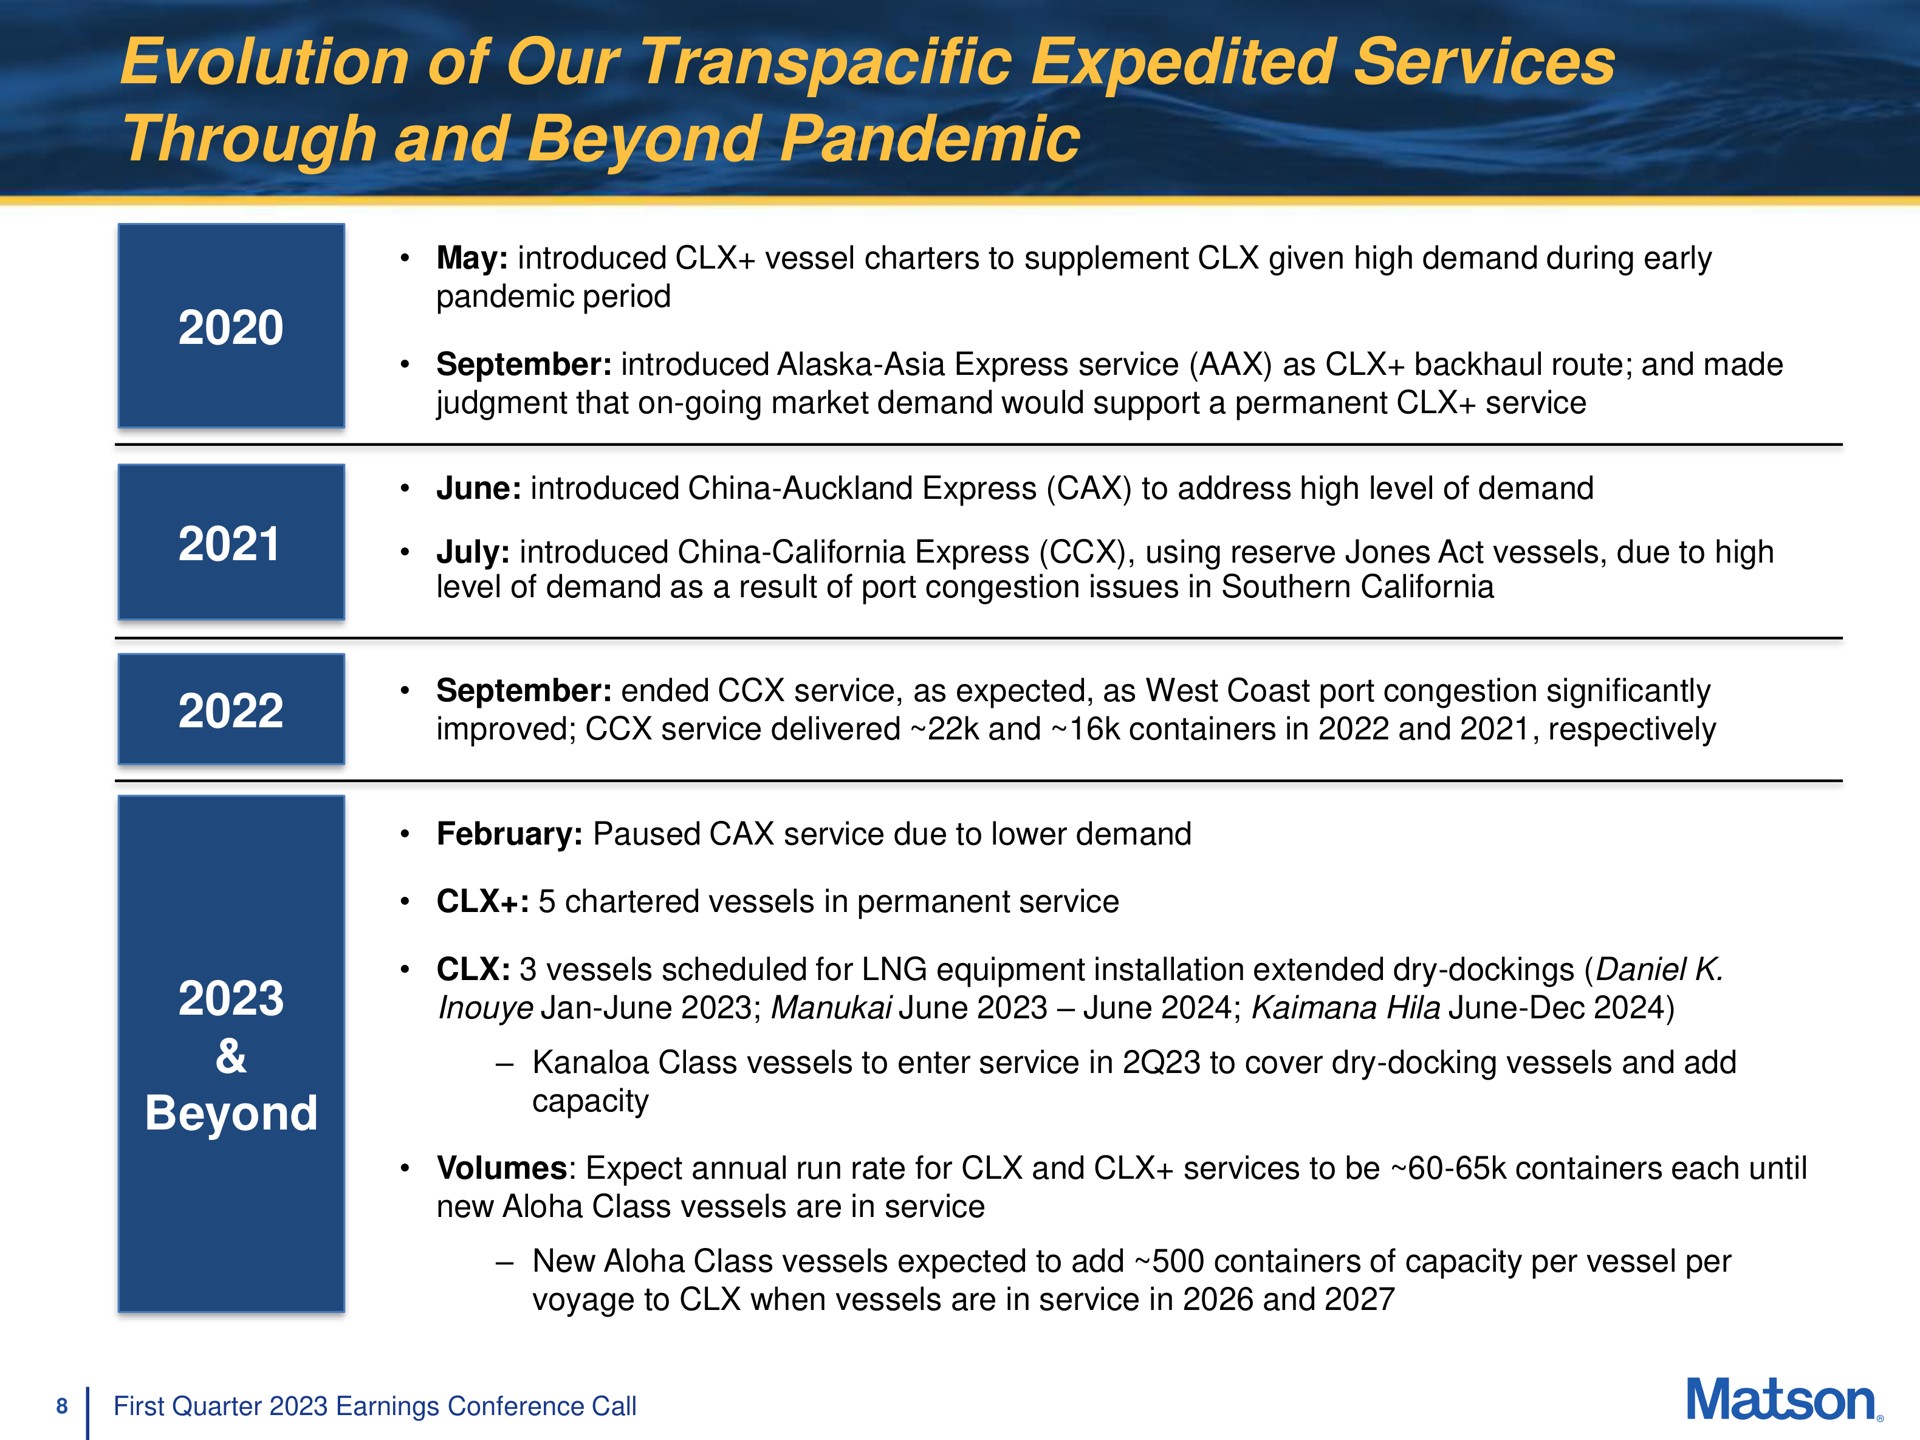 evolution of our transpacific expedited services through and beyond pandemic beyond | Matson